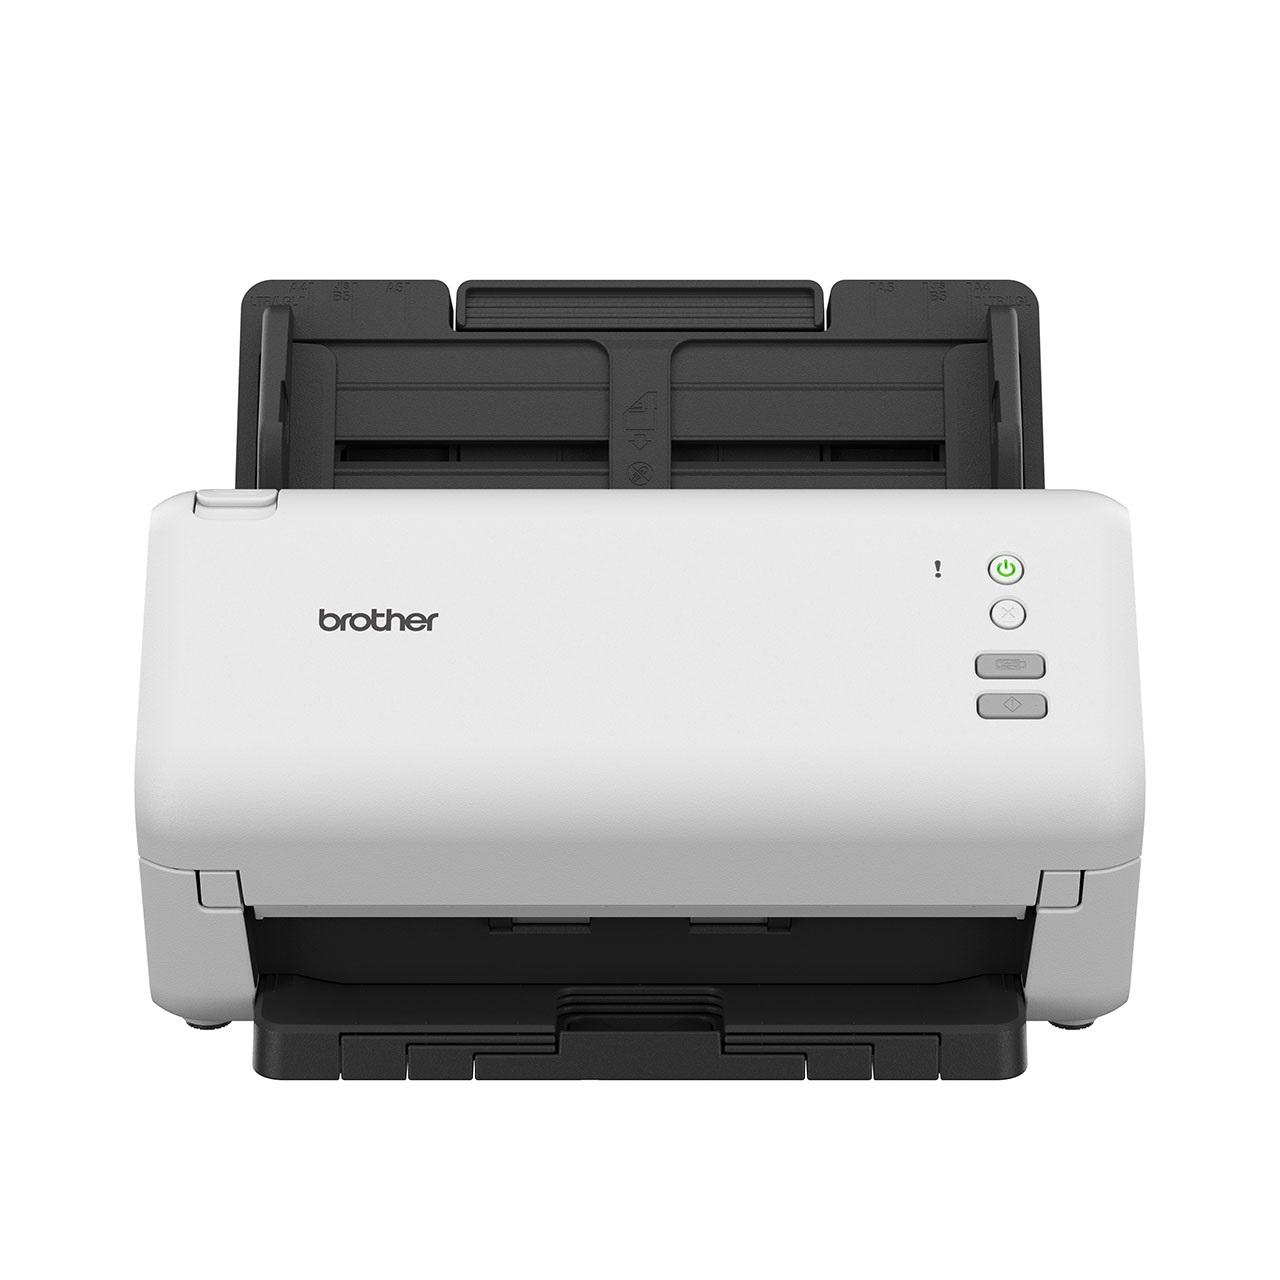 Image of Brother ADS-3100 A4 40ppm Document Scanner